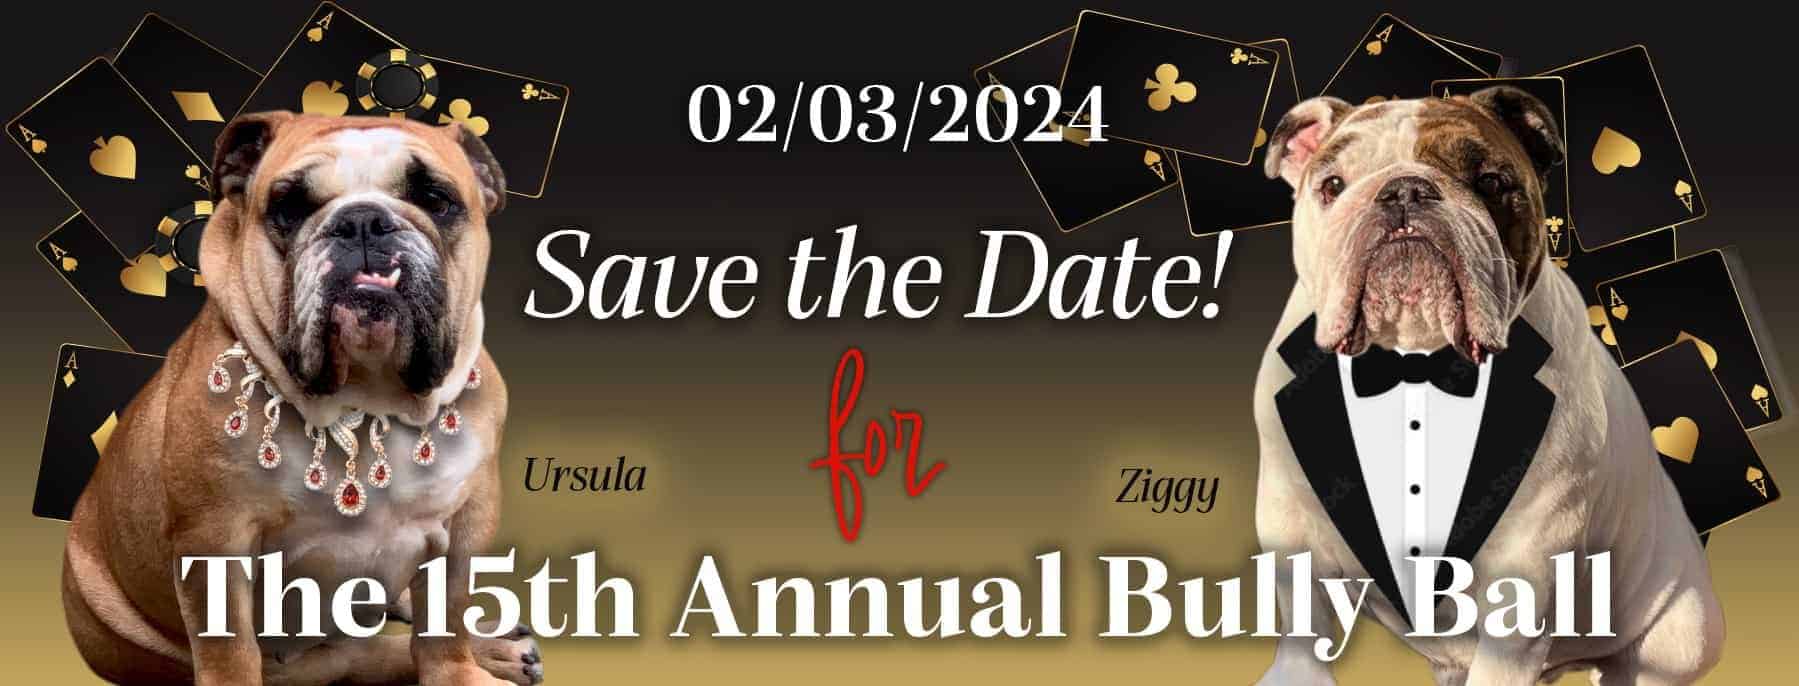 Rescue Dog Wines is proud to sponsor An exquisite evening with a seated dinner, open bar, Vegas-style casino and incredible live music. Mingle with special guests (both two-legged and four-legged). Live and silent auctions along with raffles and casino let you help save lives.